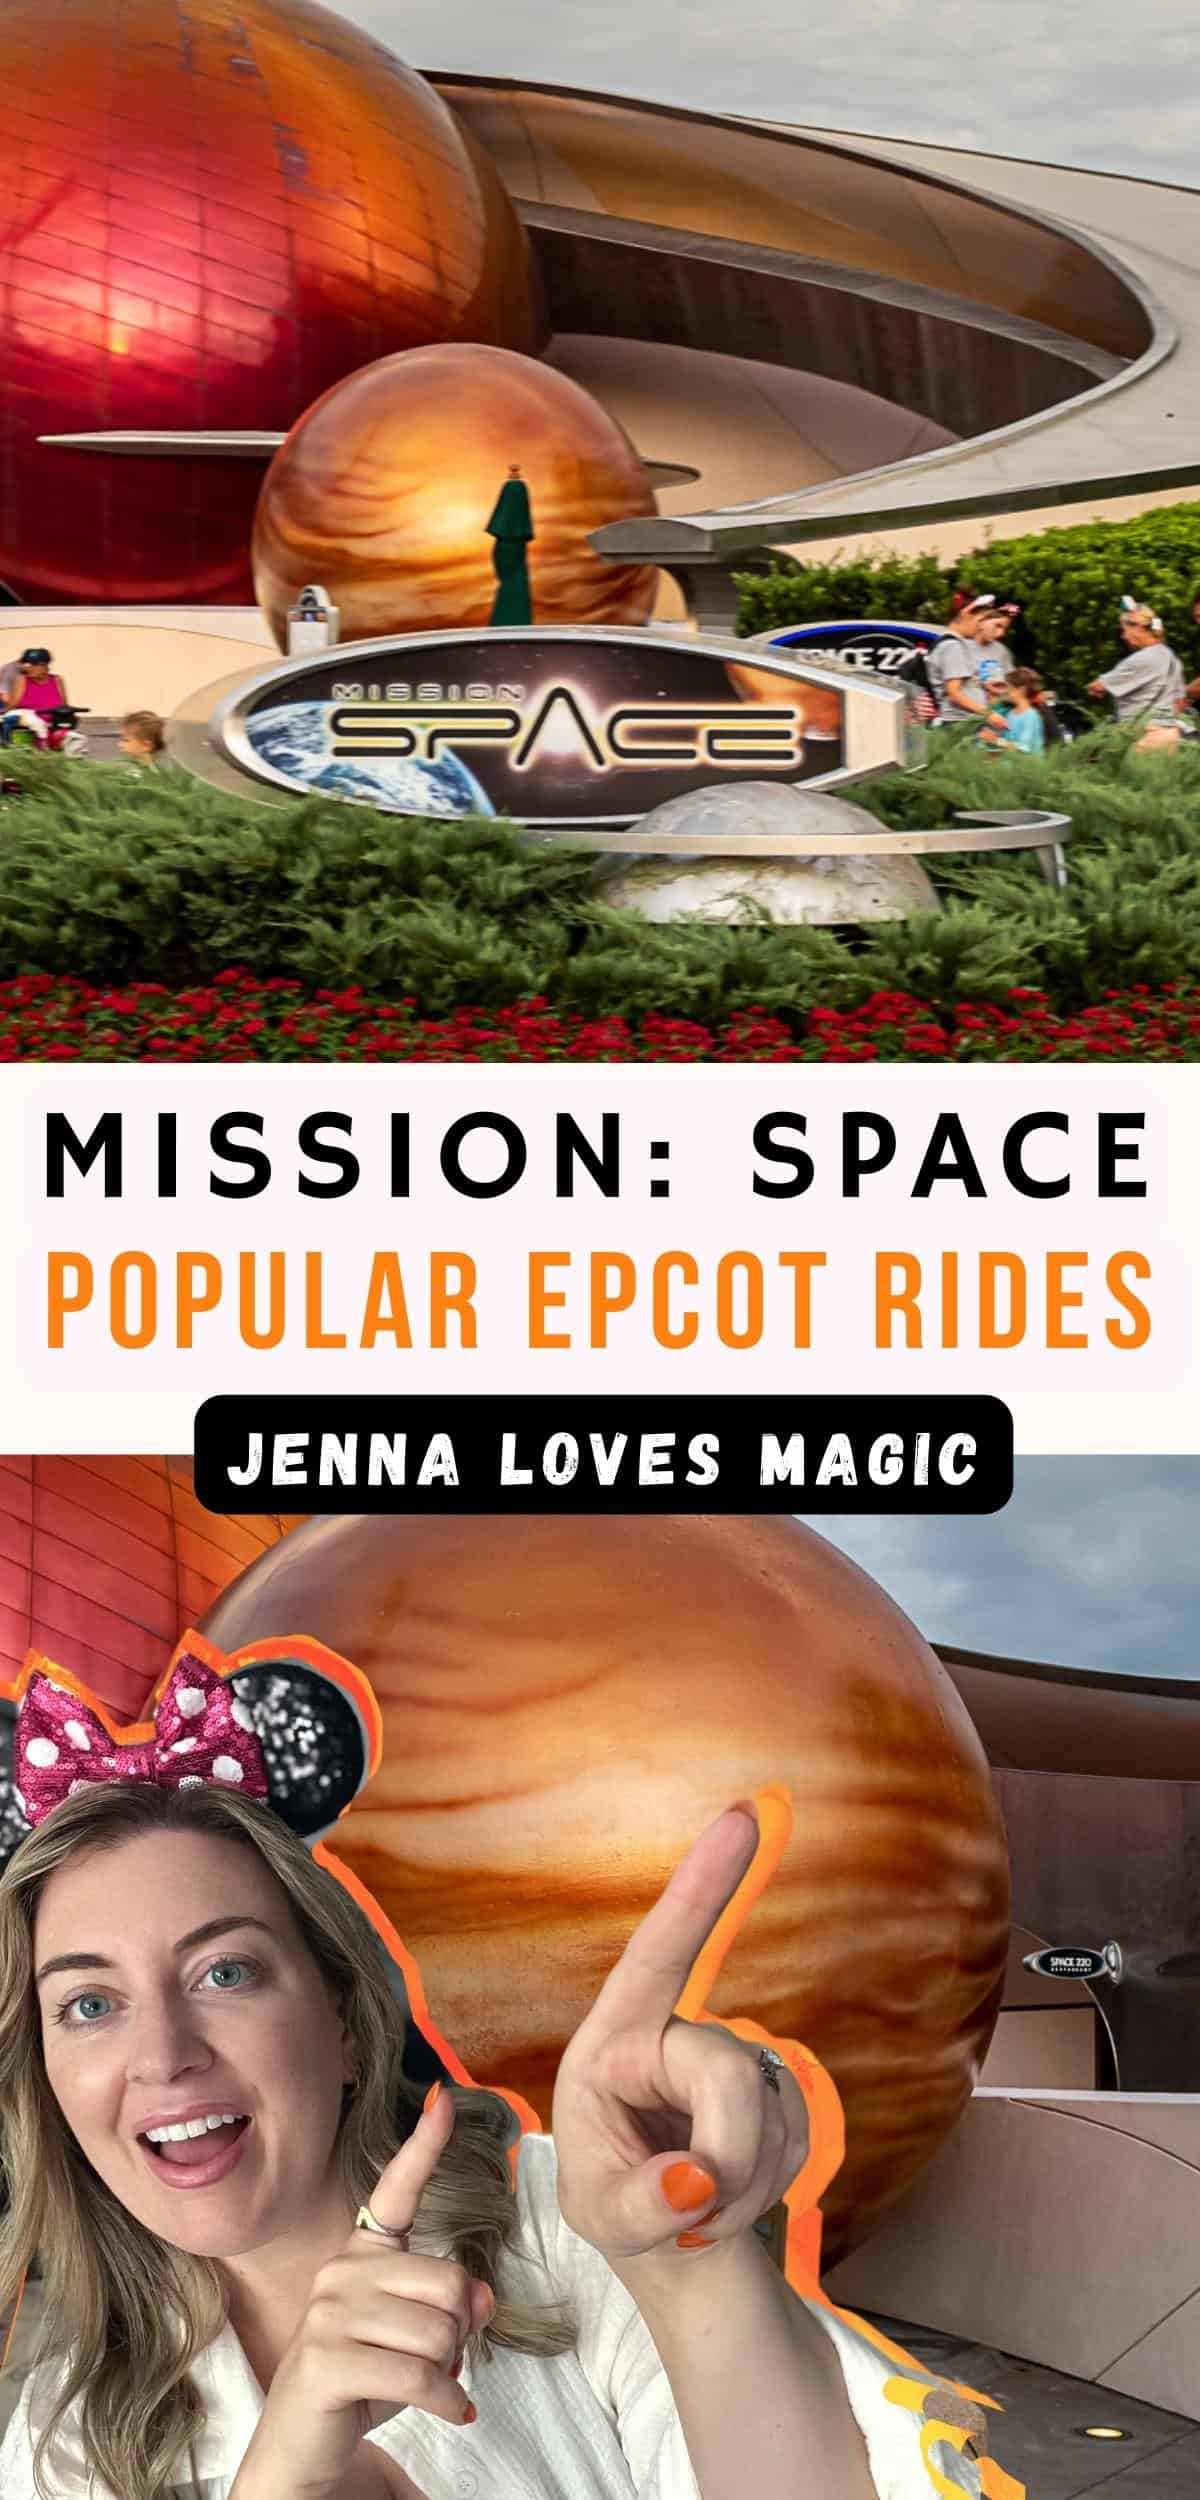 Walt Disney World Epcot Park Mission Space ride with text overlay and Jenna Loves Magic logo